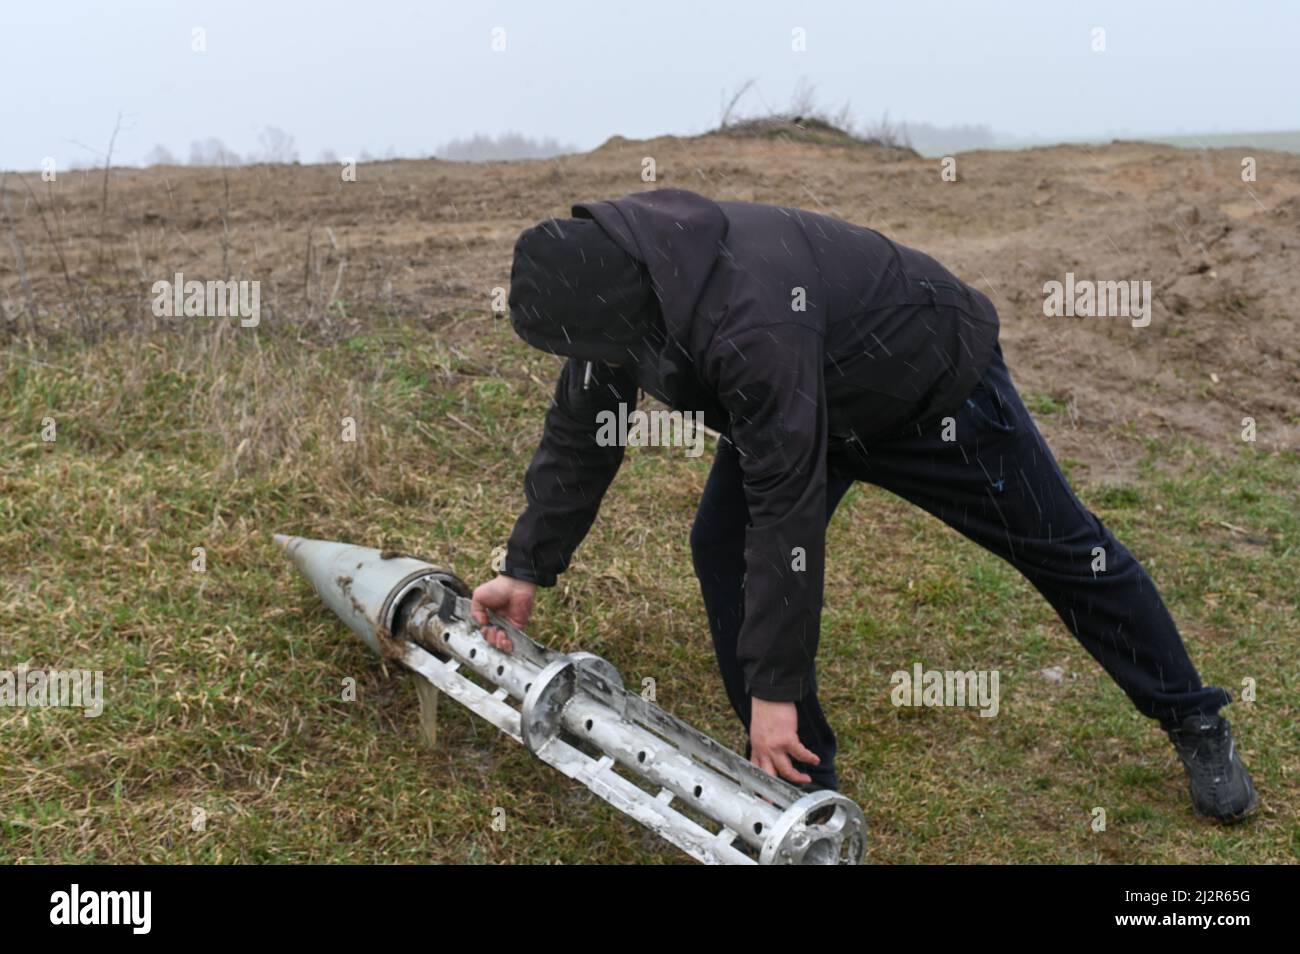 Ukraine. 03rd Apr, 2022. A Ukrainian civilian Gennadiy removes a Russian cluster munition rocket from a field near the villages of Smolyanka and Olyshivka after shelling in the previous nights, in the Chernihiv Oblast on April 3rd, 2022. Olyshivka, Ukraine. Russian military forces entered Ukraine territory on Feb. 24, 2022. (Photo by Justin Yau/Sipa USA) Credit: Sipa USA/Alamy Live News Stock Photo